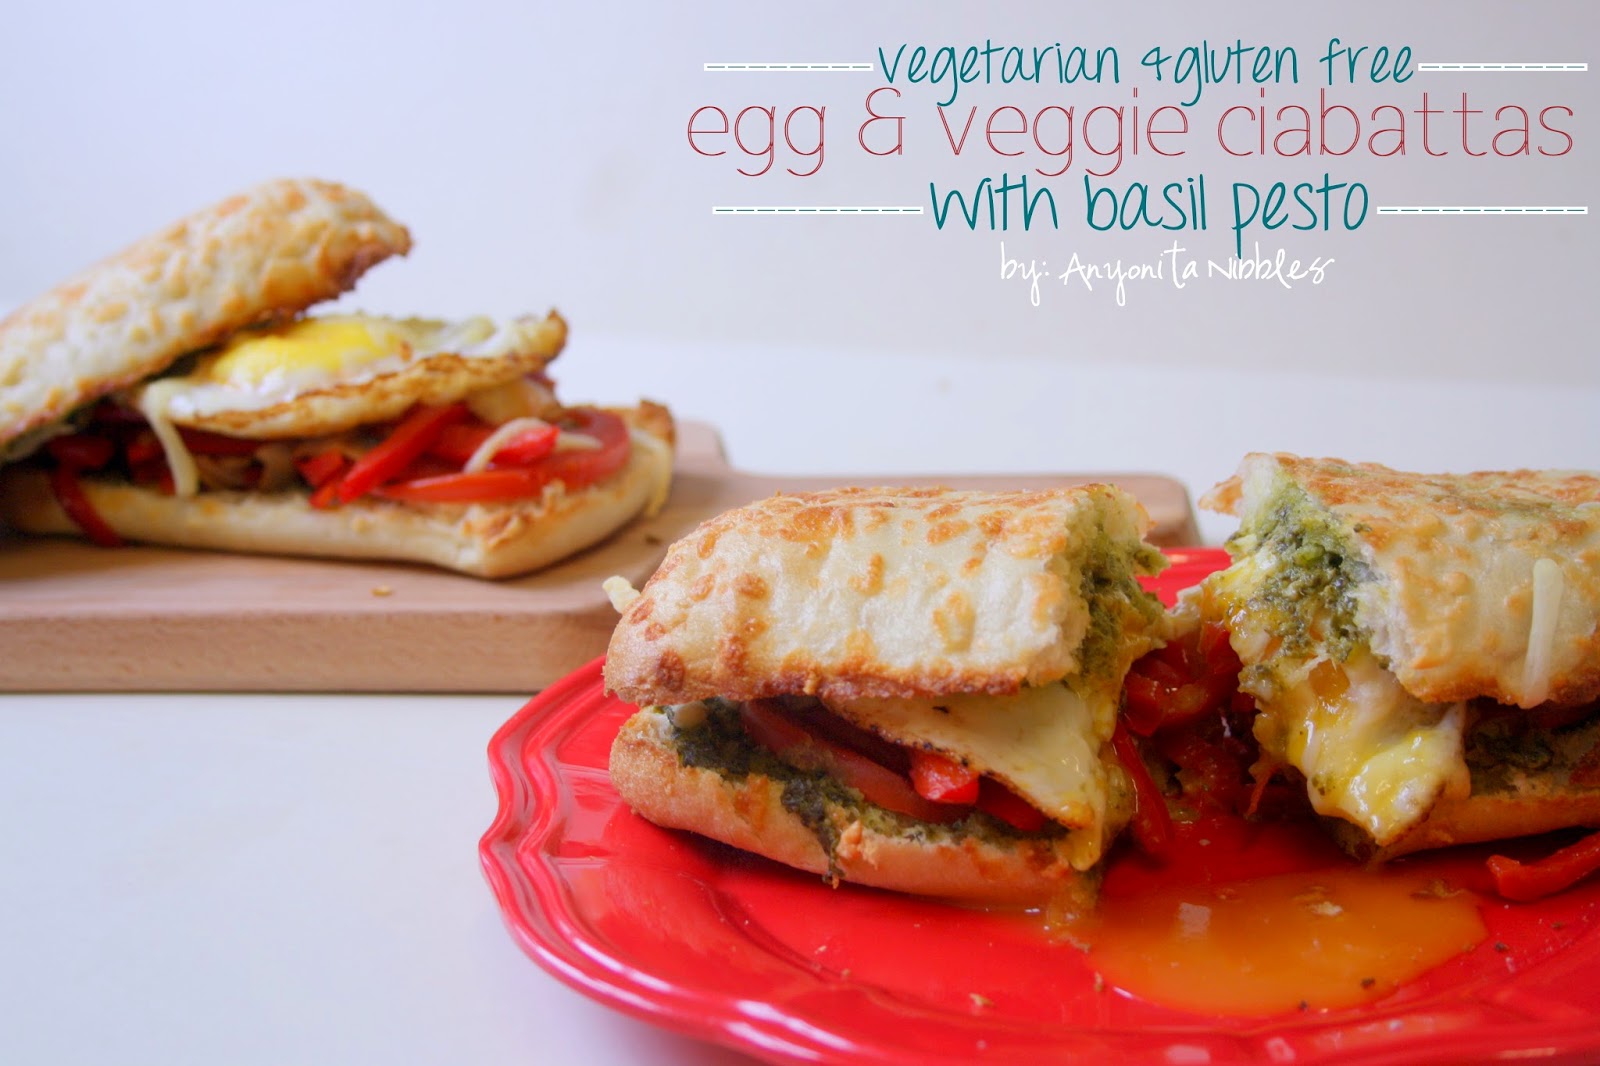 This is how celiacs do convenience food: 10 minute vegetable and egg ciabatta sandwiche